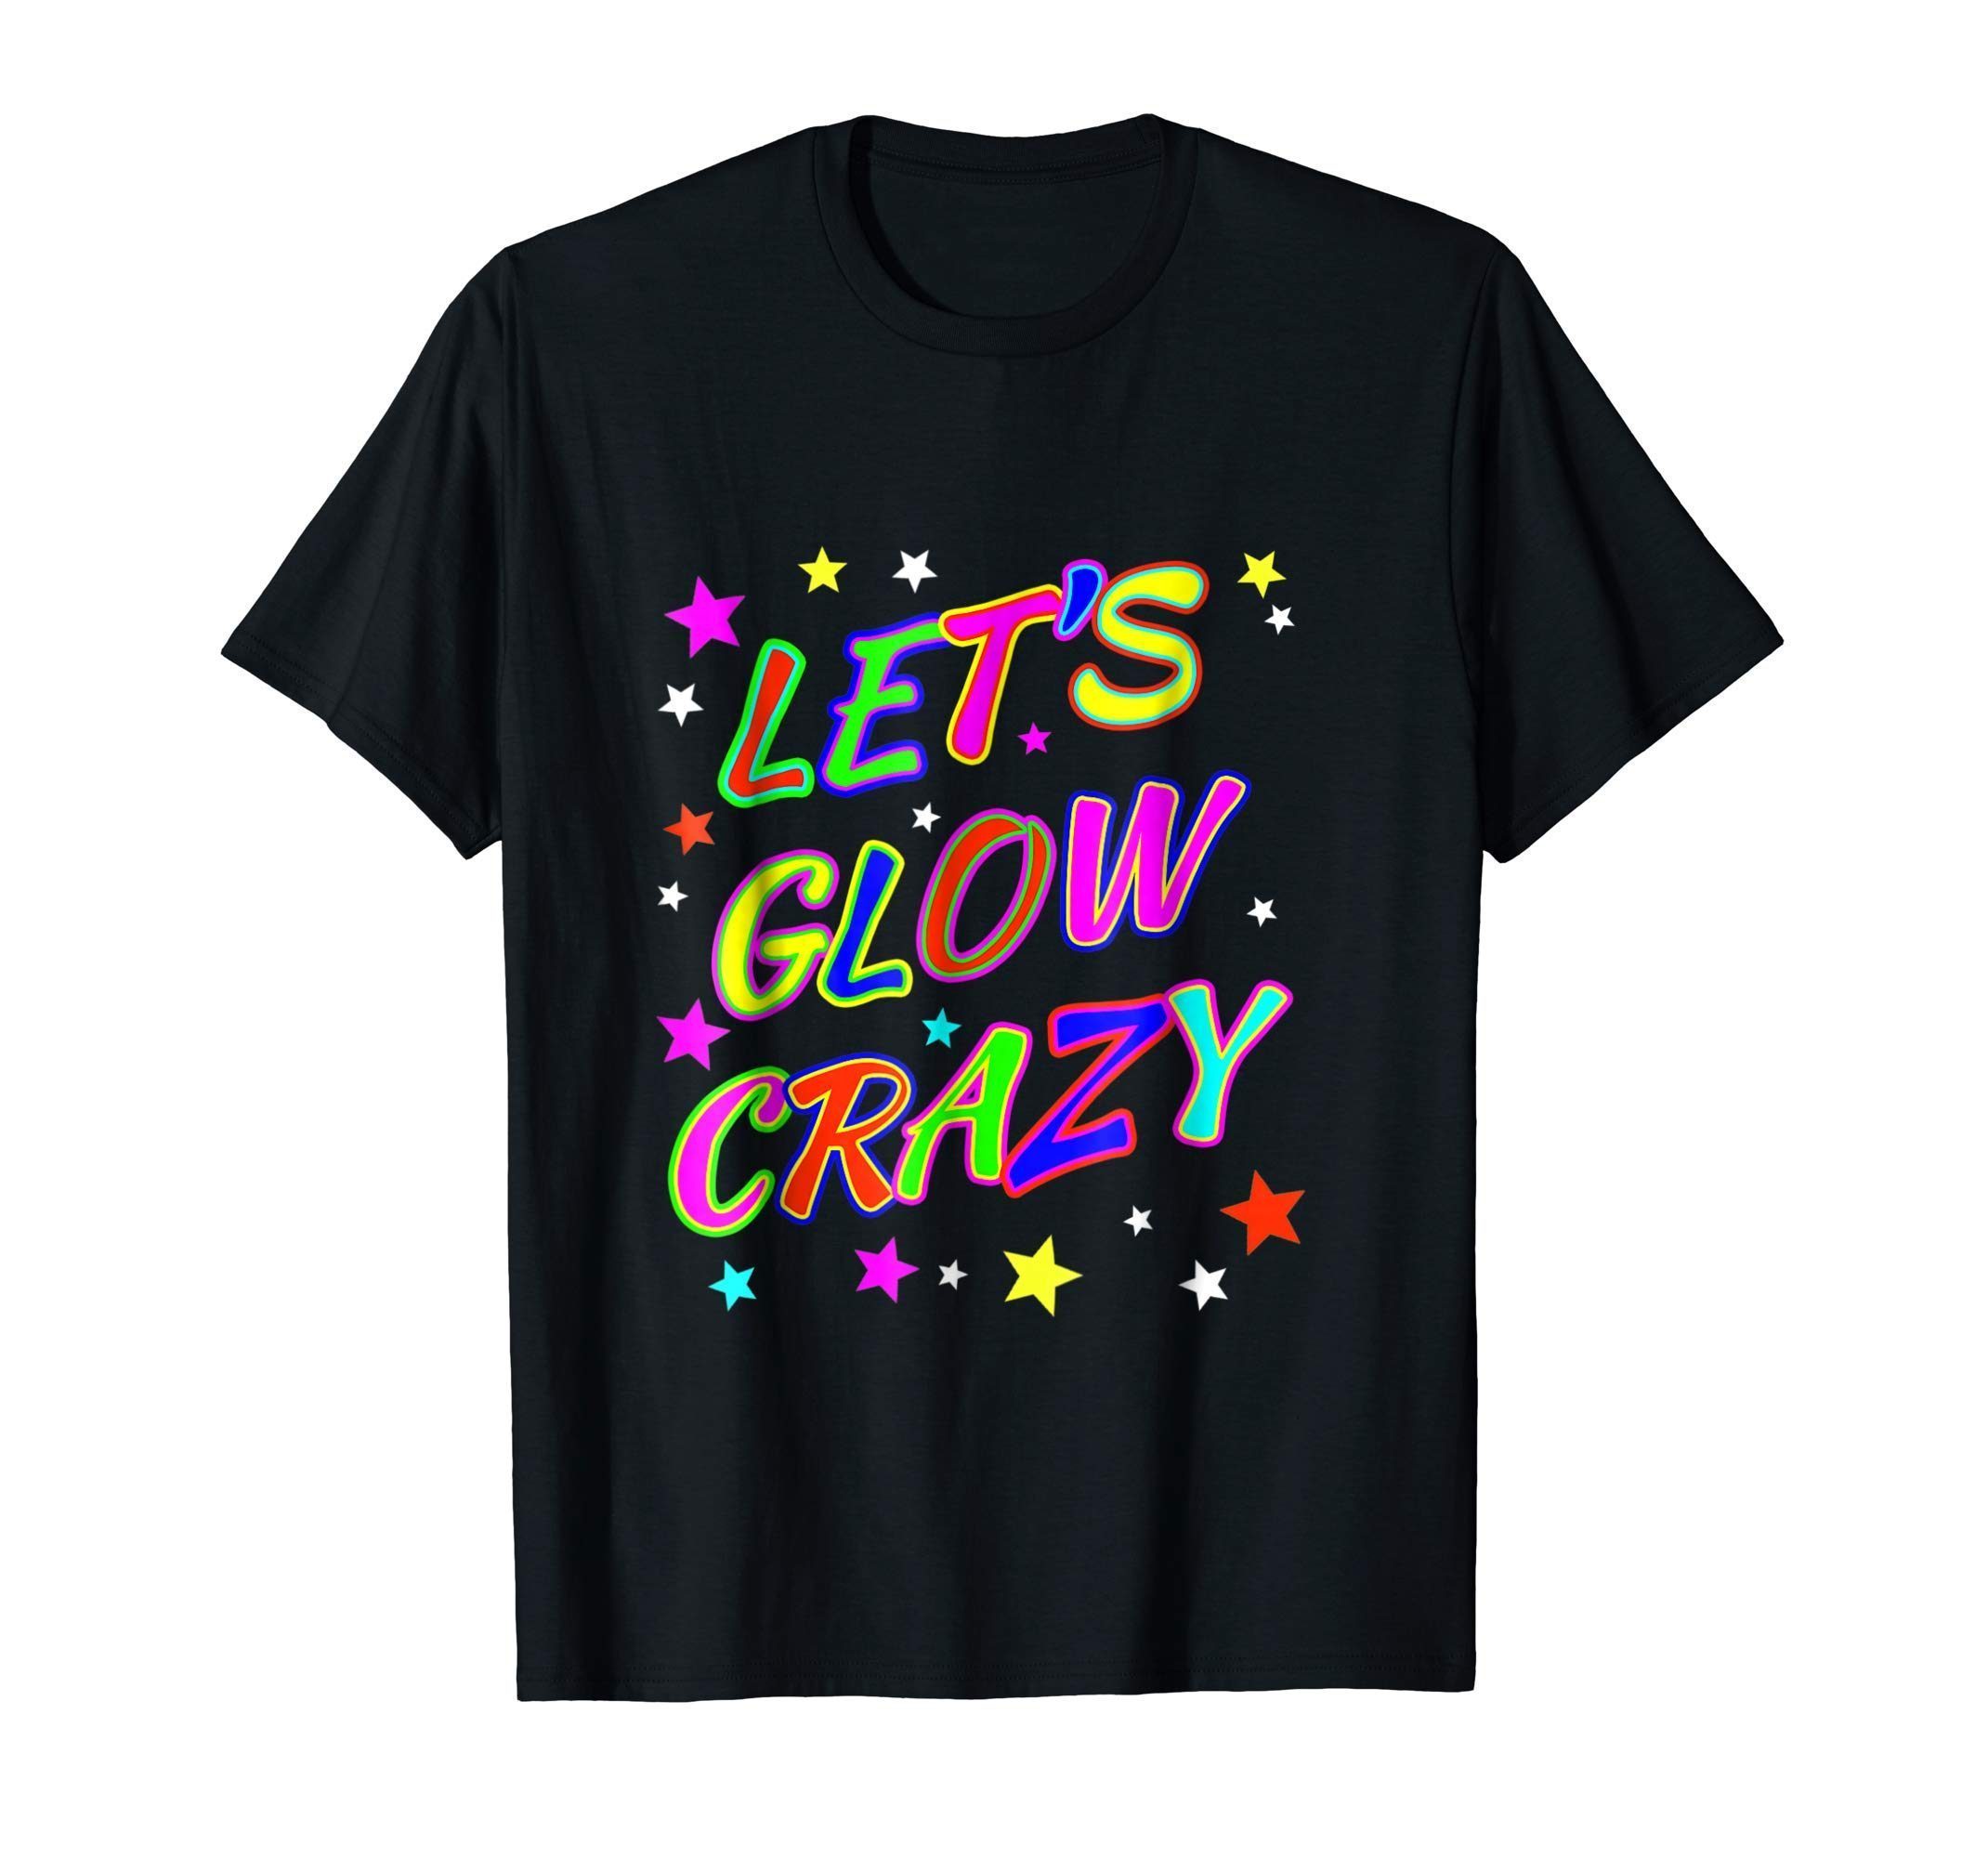 Let's Glow Crazy Party Funny 80s Style Birthday Party Shirt. 